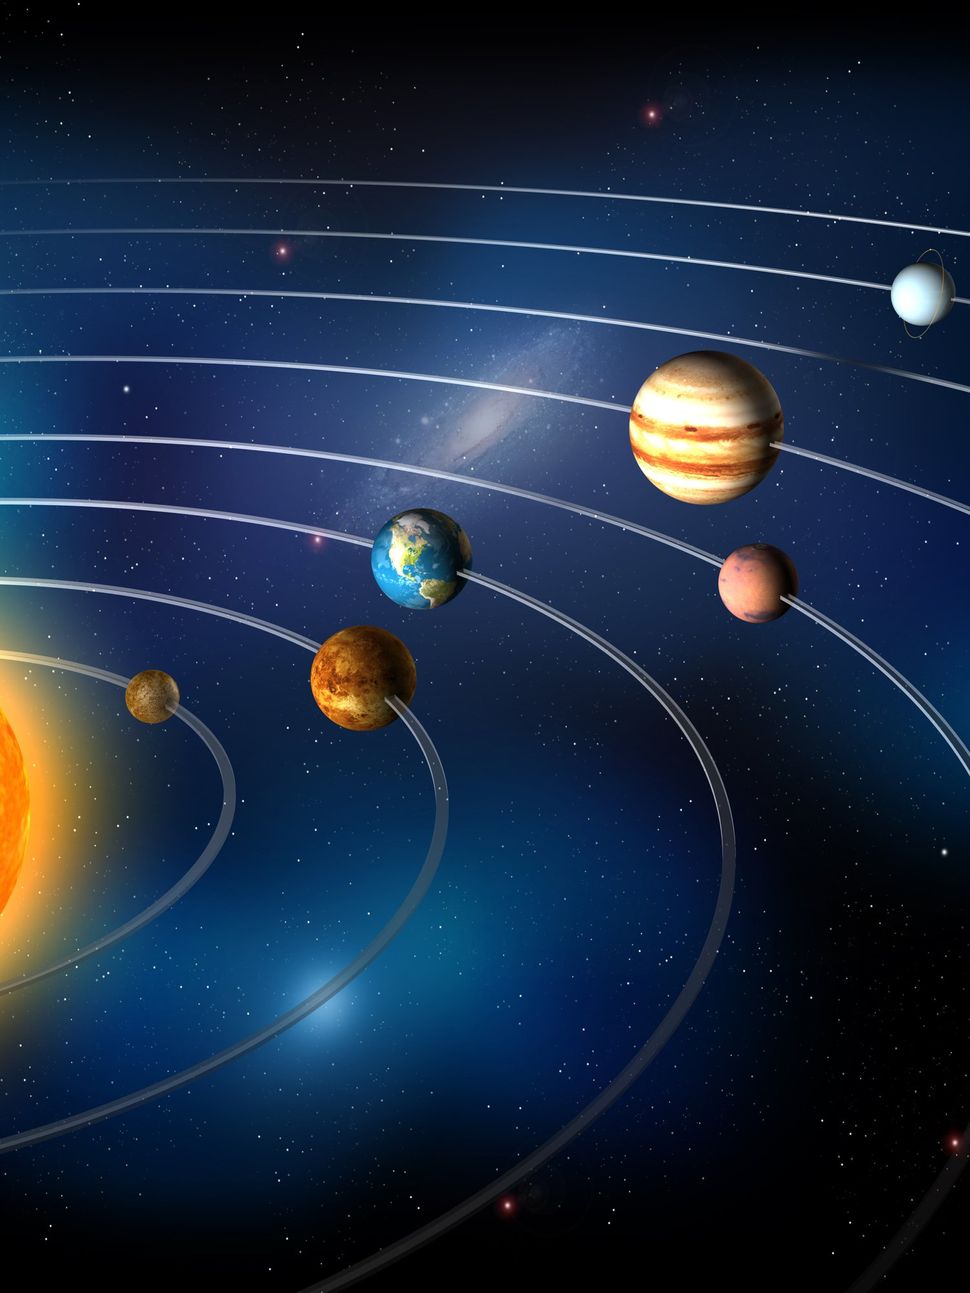 secret planets in our solar system